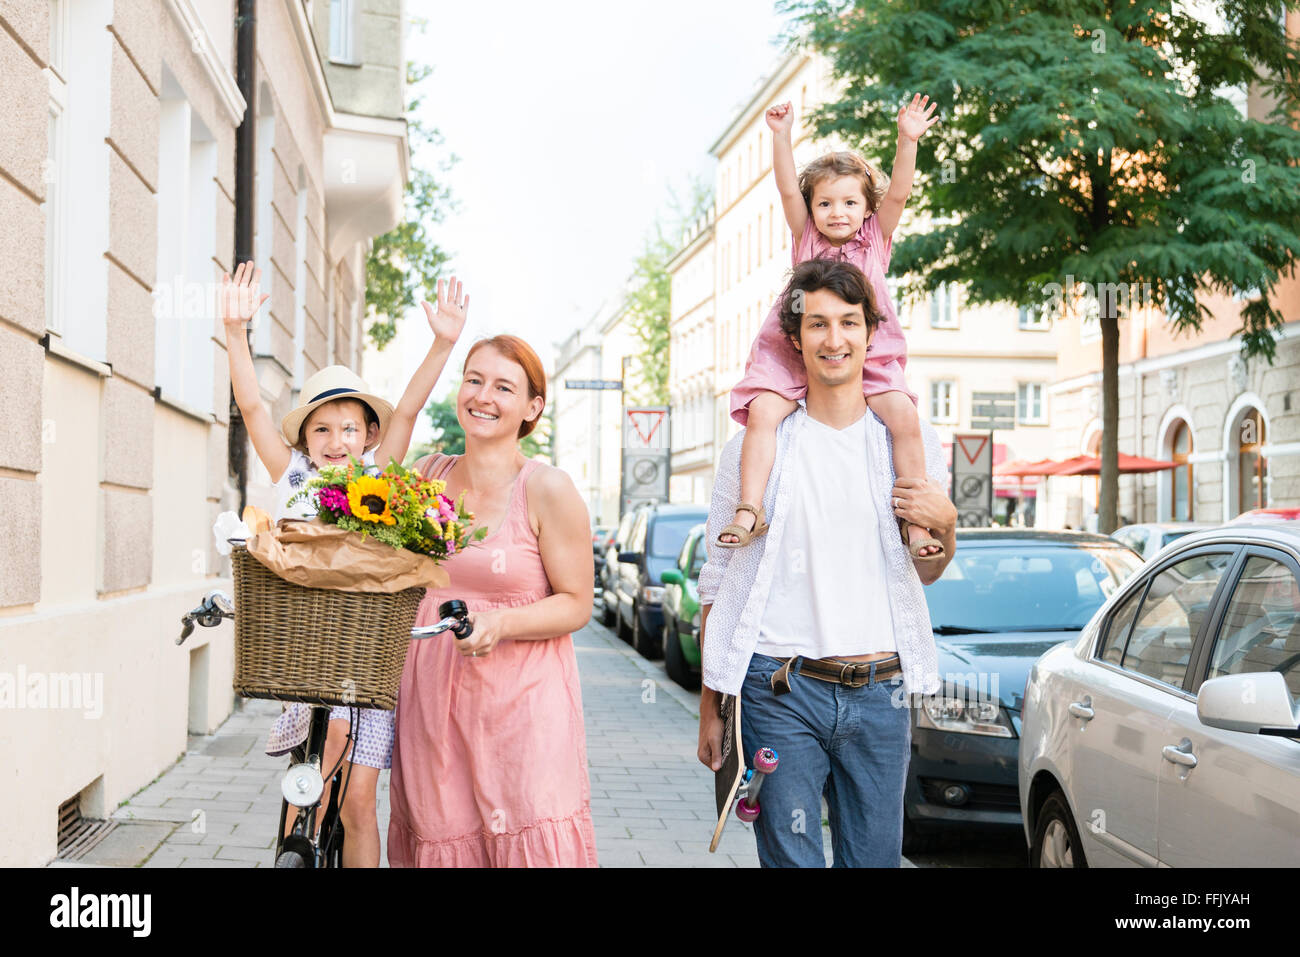 Family with two children walking in city Stock Photo